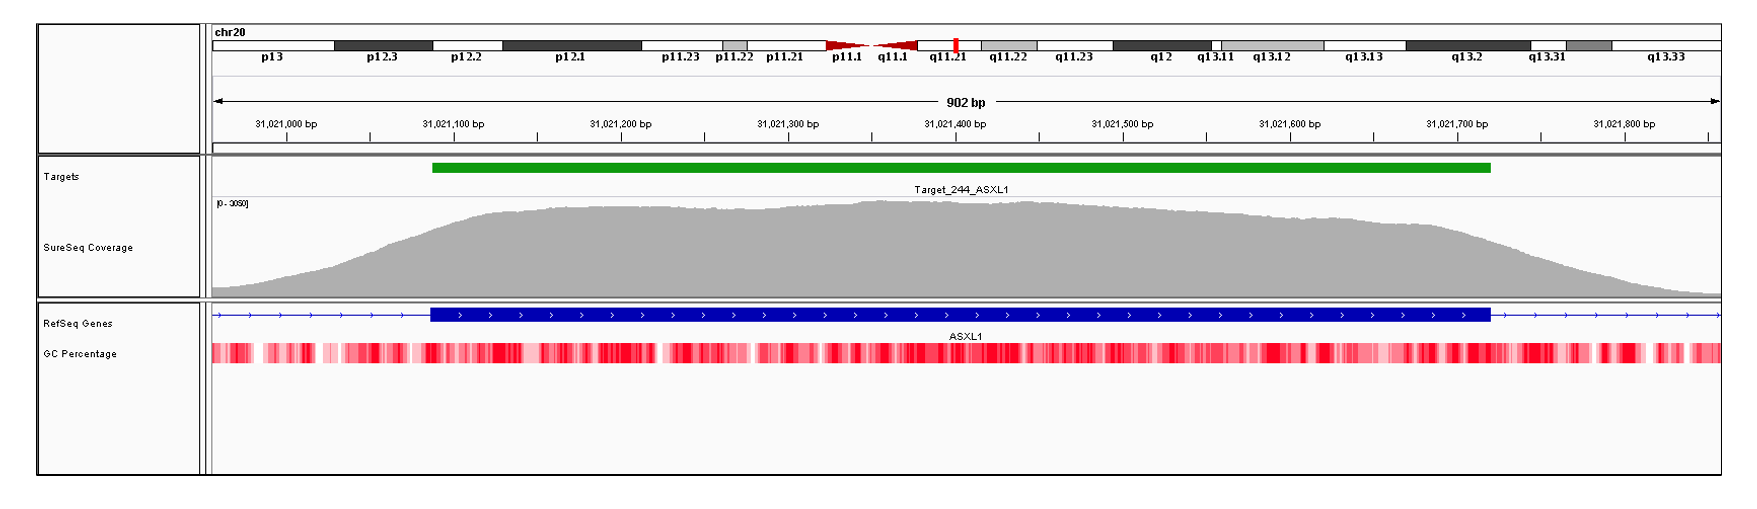 ASXL1 Exon 11 (hg19 chr20:31021087-31021720). Depth of coverage per base (grey). Targeted region (green). Gene coding region as defined by RefSeq (blue). GC percentage (red). Image